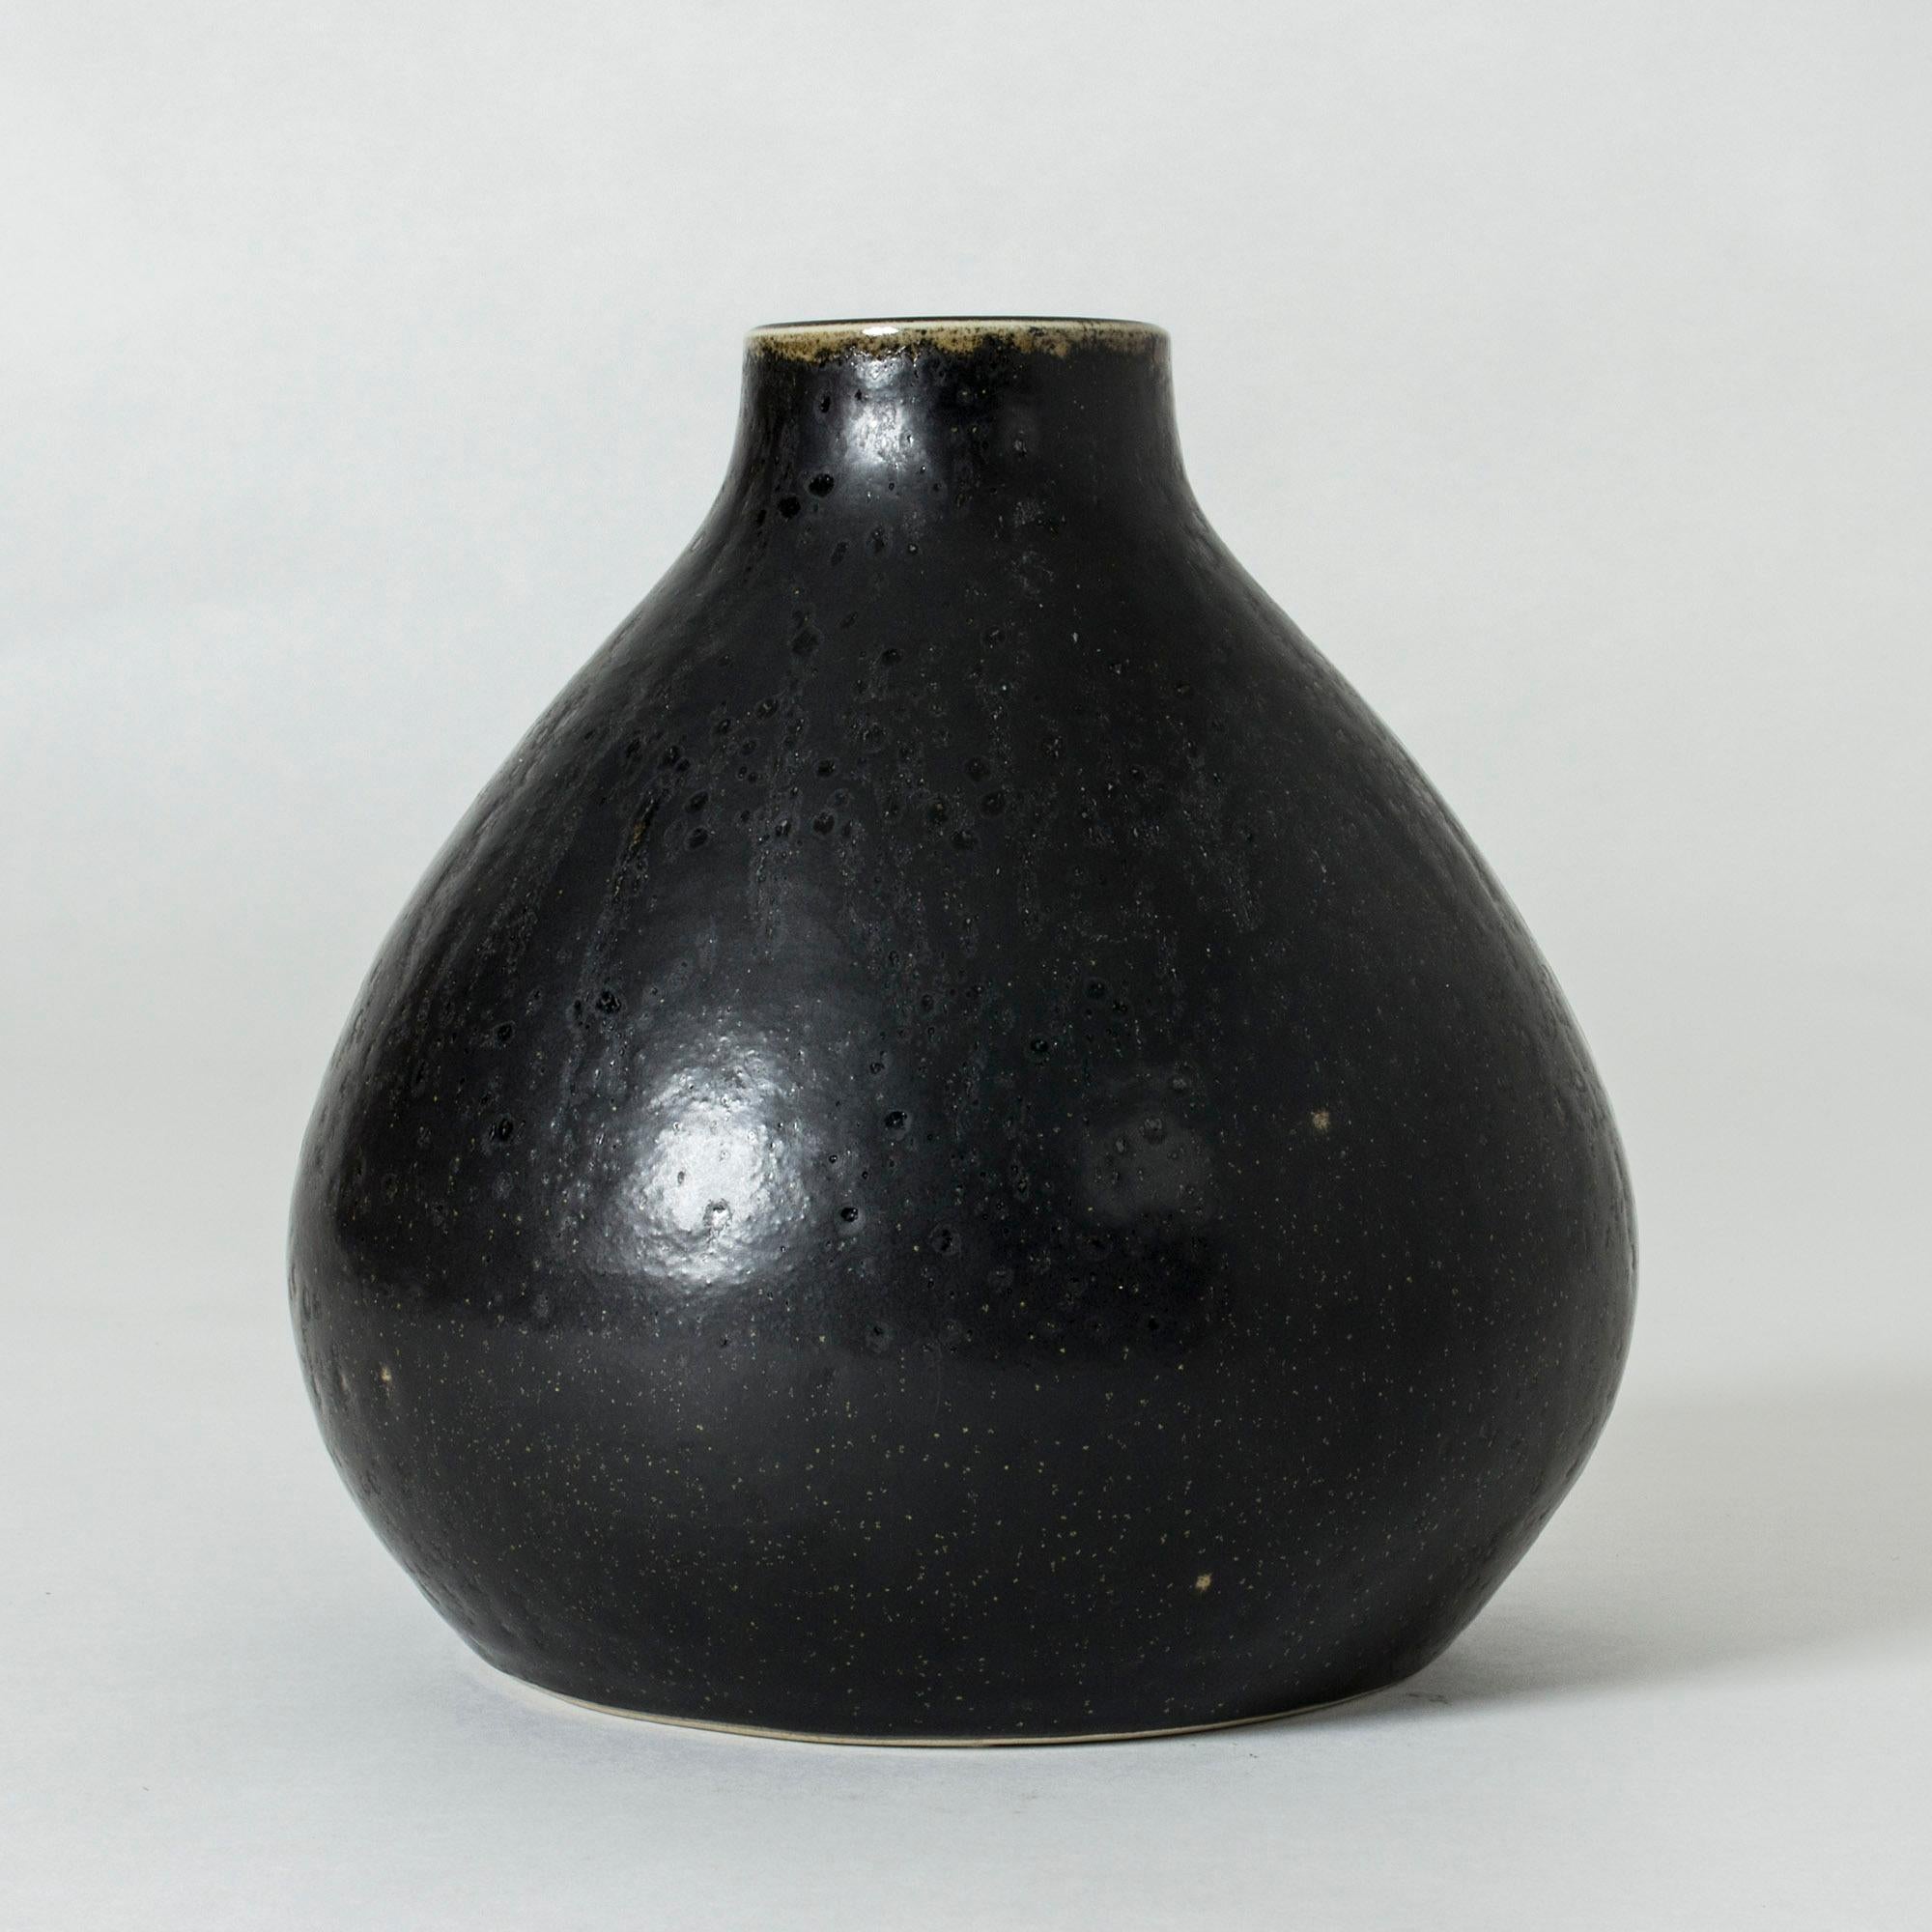 Unique stoneware vase by Carl-Harry Stålhane, in a stout form. Glazed with thick ciel noir glaze that blends over into off-white around the mouth.